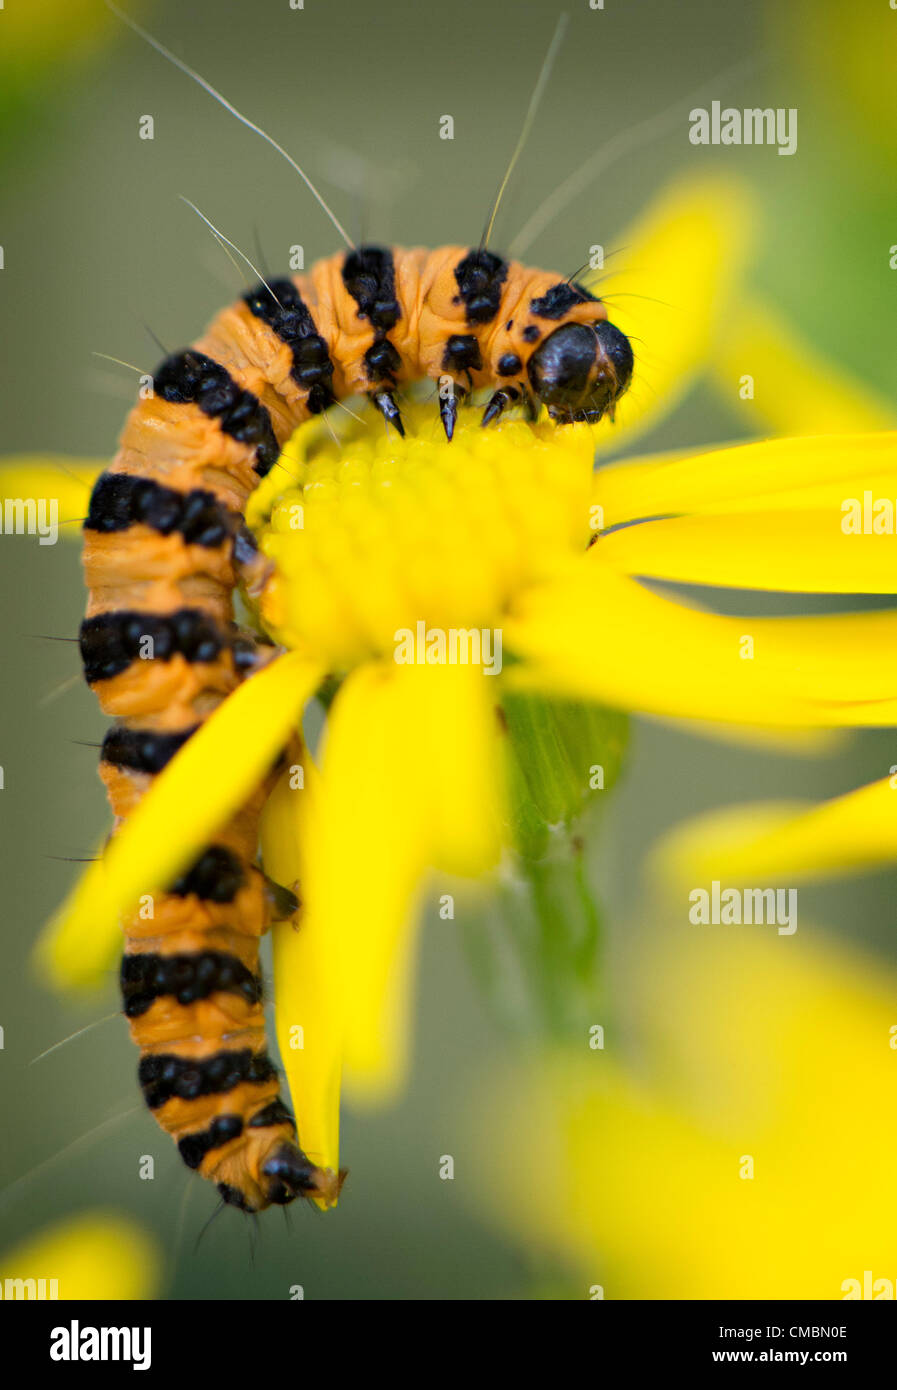 July 12, 2012 - Roseburg, Oregon, U.S - A cinnabar moth caterpillar feeds on a tansy ragwort plant in a field on a ranch near Roseburg. Cinnabar moths were introduced into North America to control the poisonous ragwort plant on which its larvae feed. The feeding larvae absorb toxins from the ragwort plants and become unpalatable to predators.  Their bright colors serve as a warning sign. (Credit Image: © Robin Loznak/ZUMAPRESS.com) Stock Photo